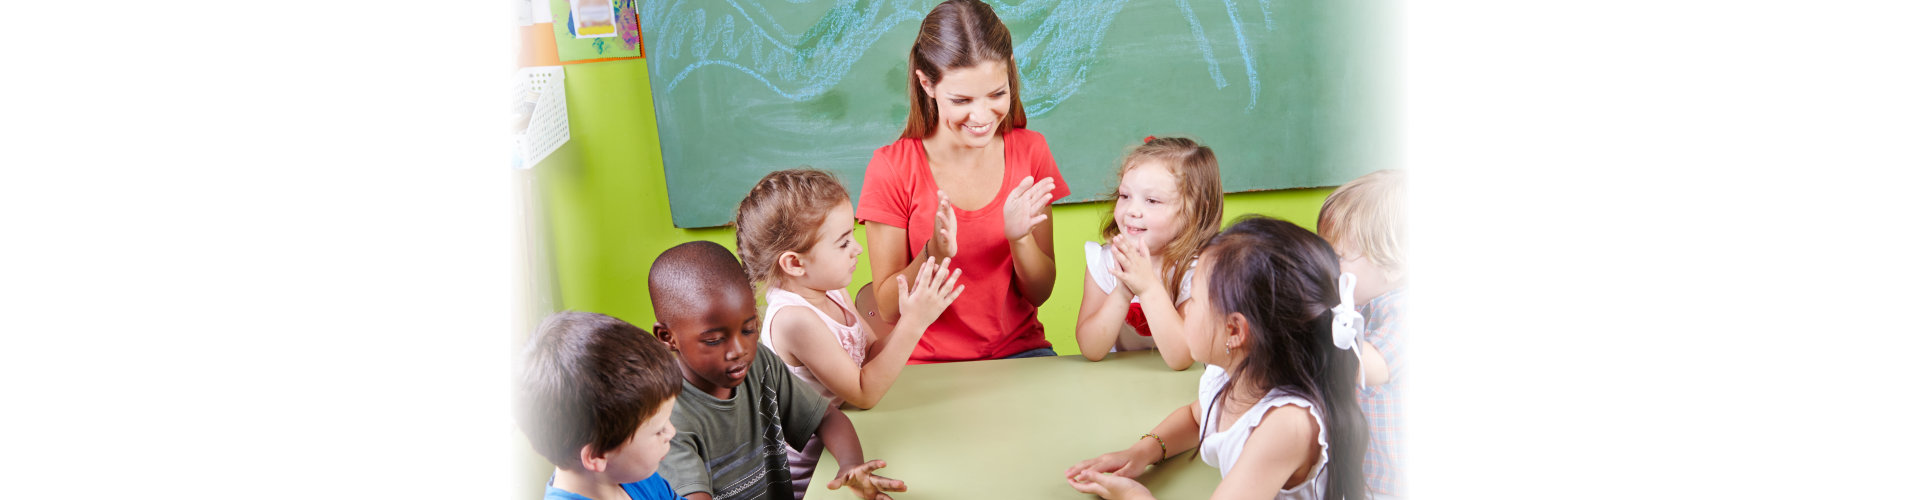 Teacher clapping with students